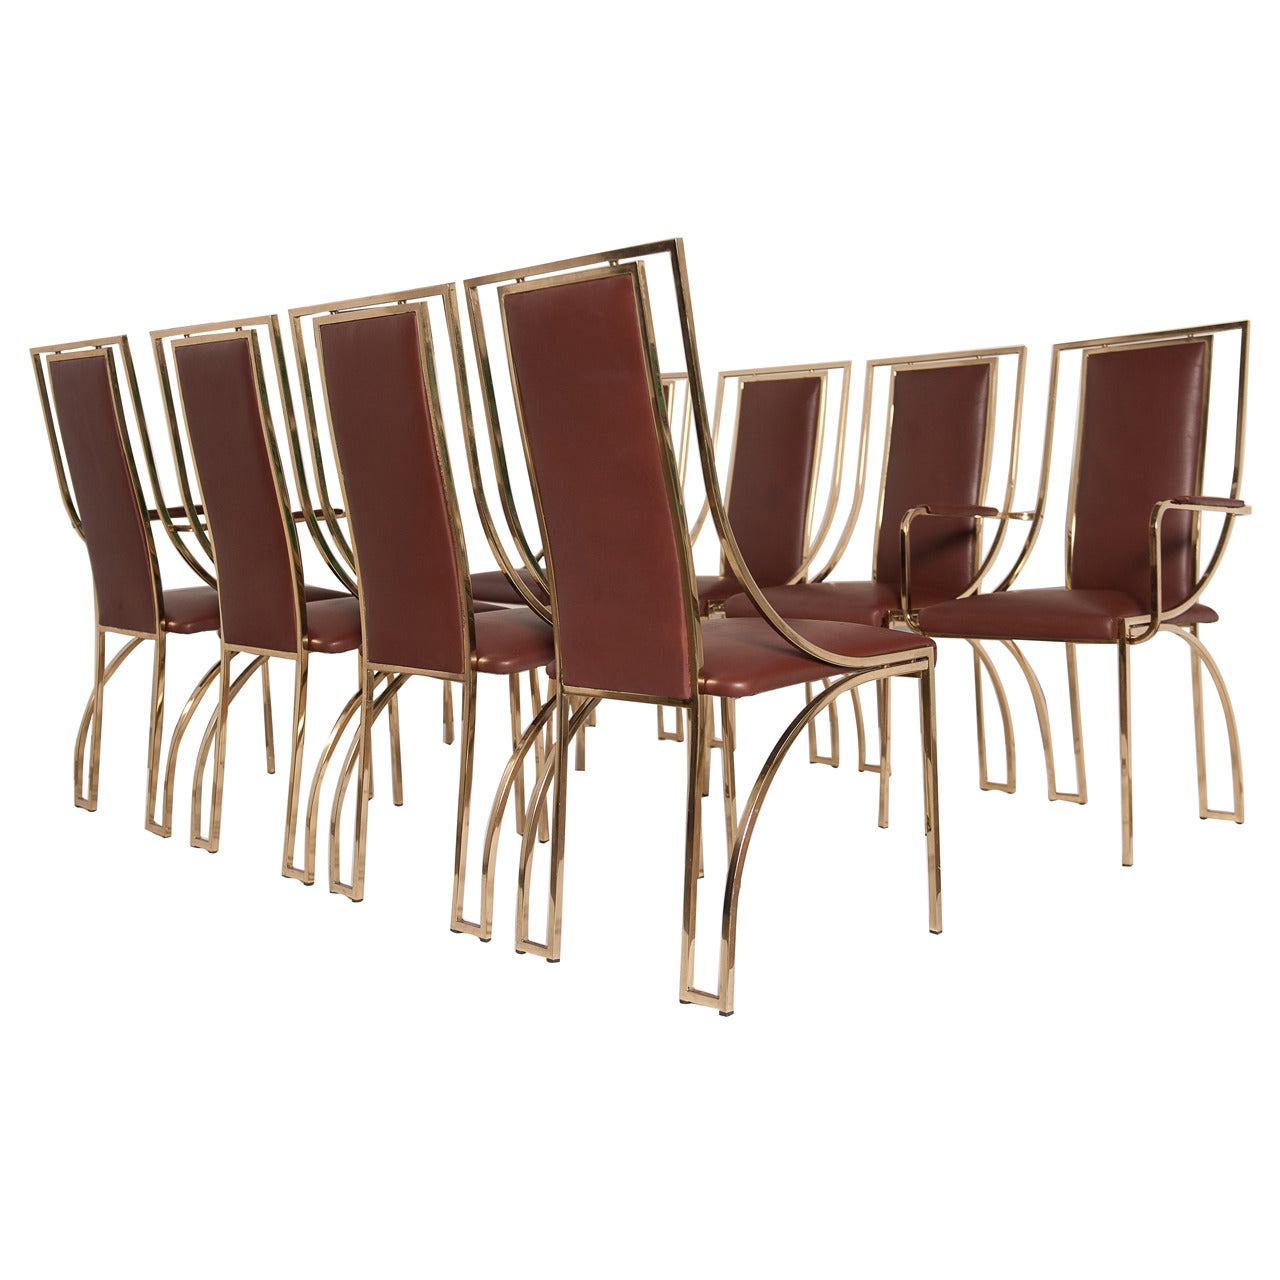 Stunning set of 8 dining chairs by Renato Zevi in brown calf leather, Italy